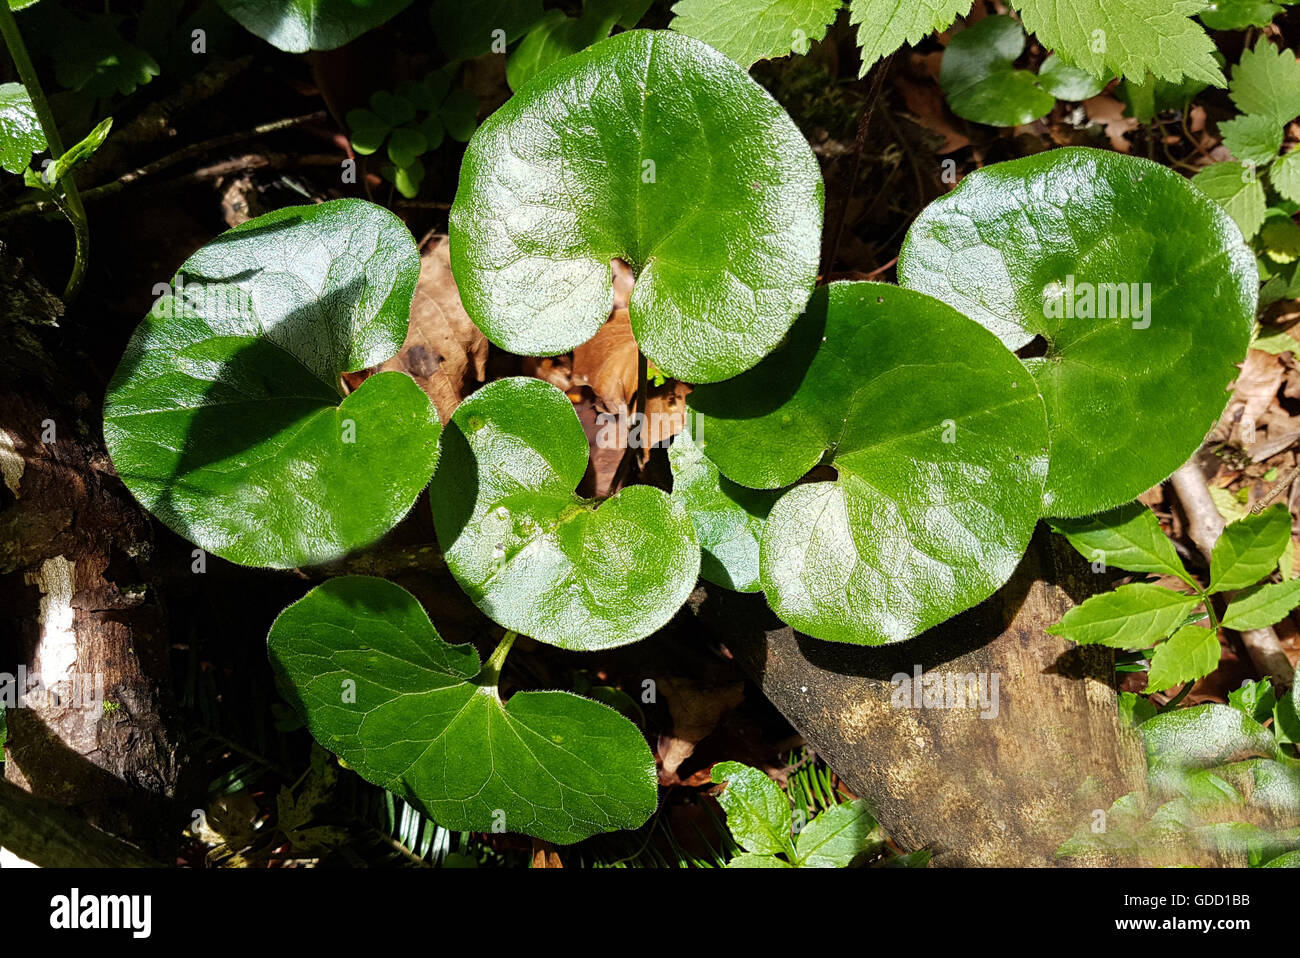 Hasenpfeffer High Resolution Stock Photography and Images - Alamy